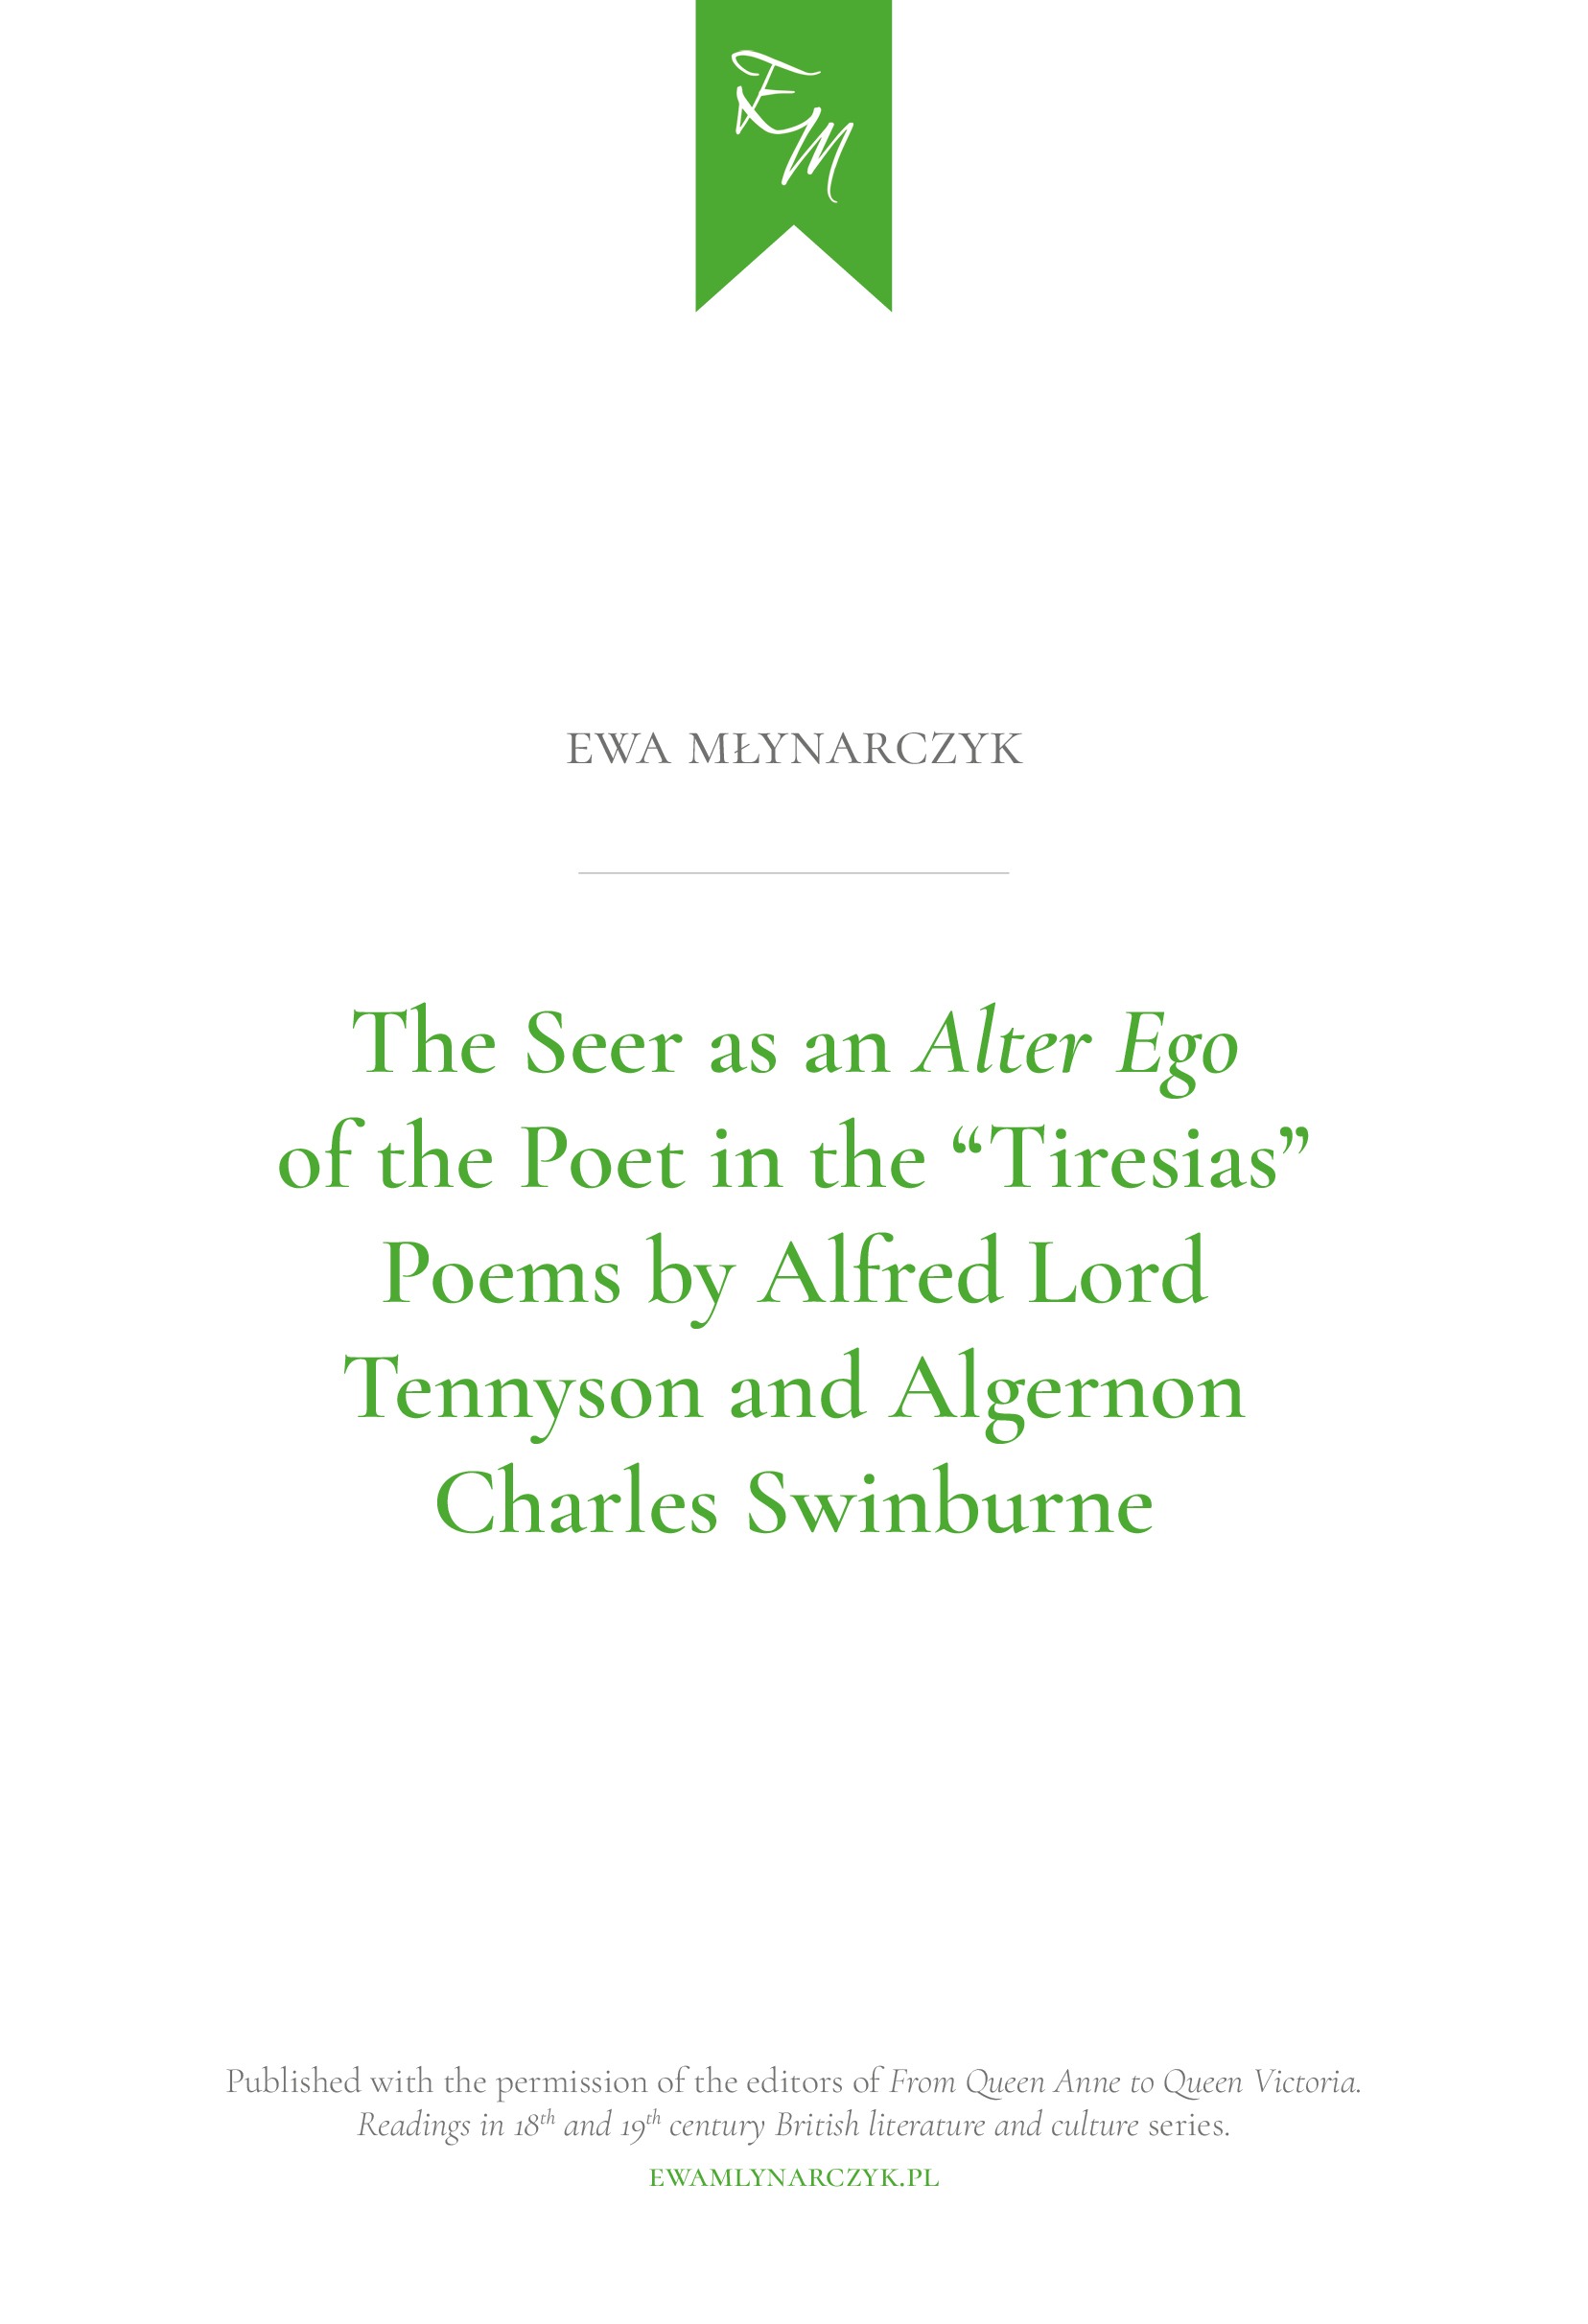 Articles by Ewa Młynarczyk / Artykuły Ewy Młynarczyk: The Seer as an Alter Ego of the Poet in the "Tiresias" Poems by Alfred Lord Tennyson and Algernon Charles Swinburne